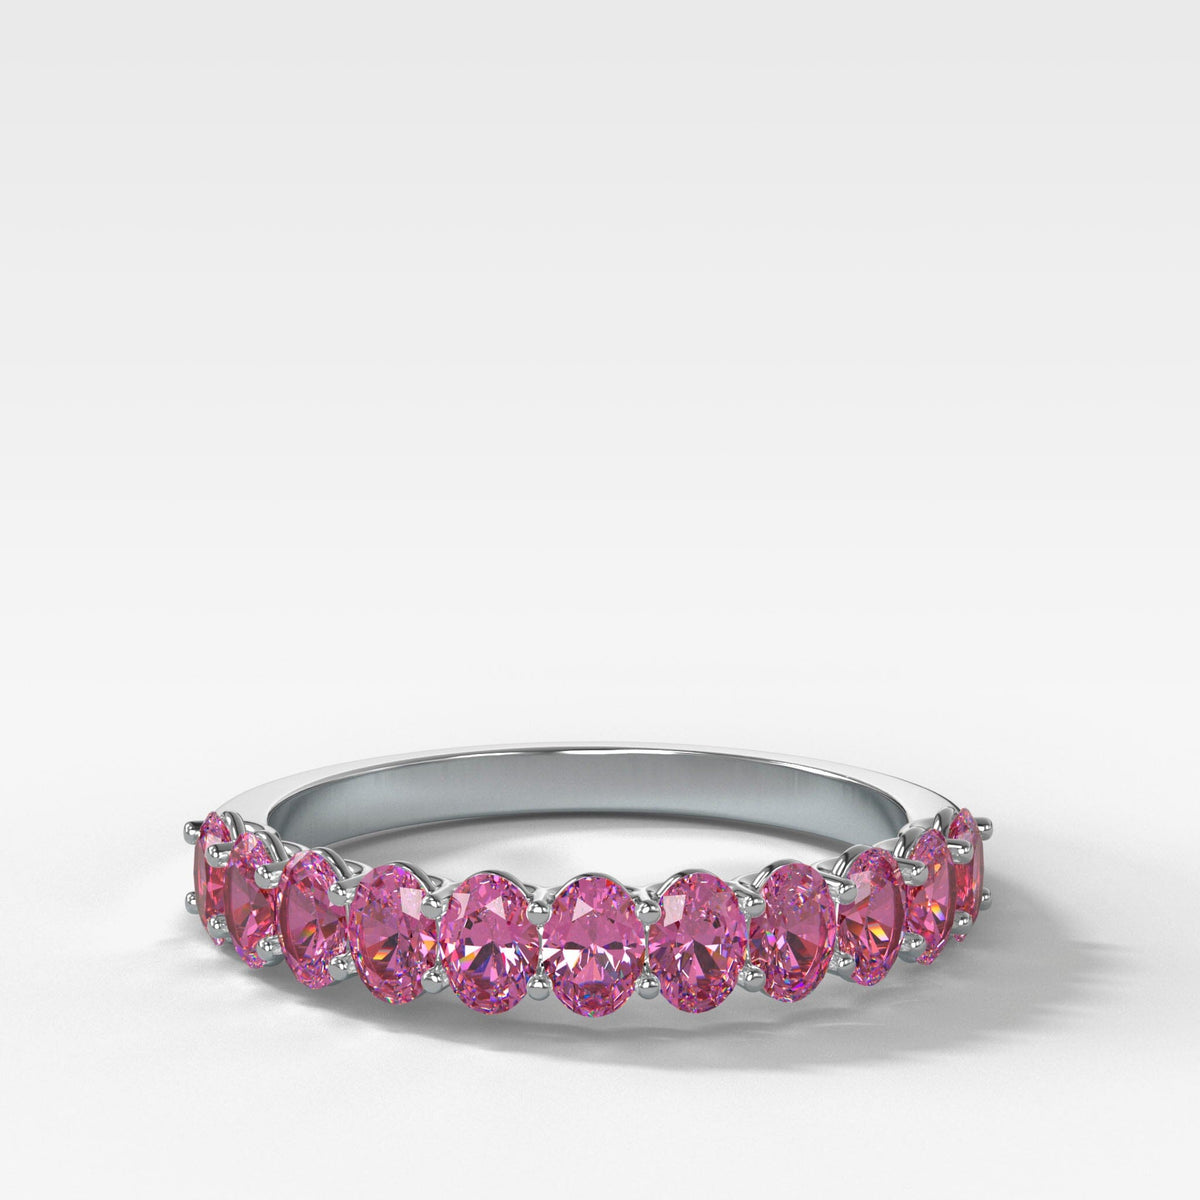 Petite Shared Prong Wedding Band with Pink Oval Sapphires Band Good Stone Inc White Gold 14k Natural